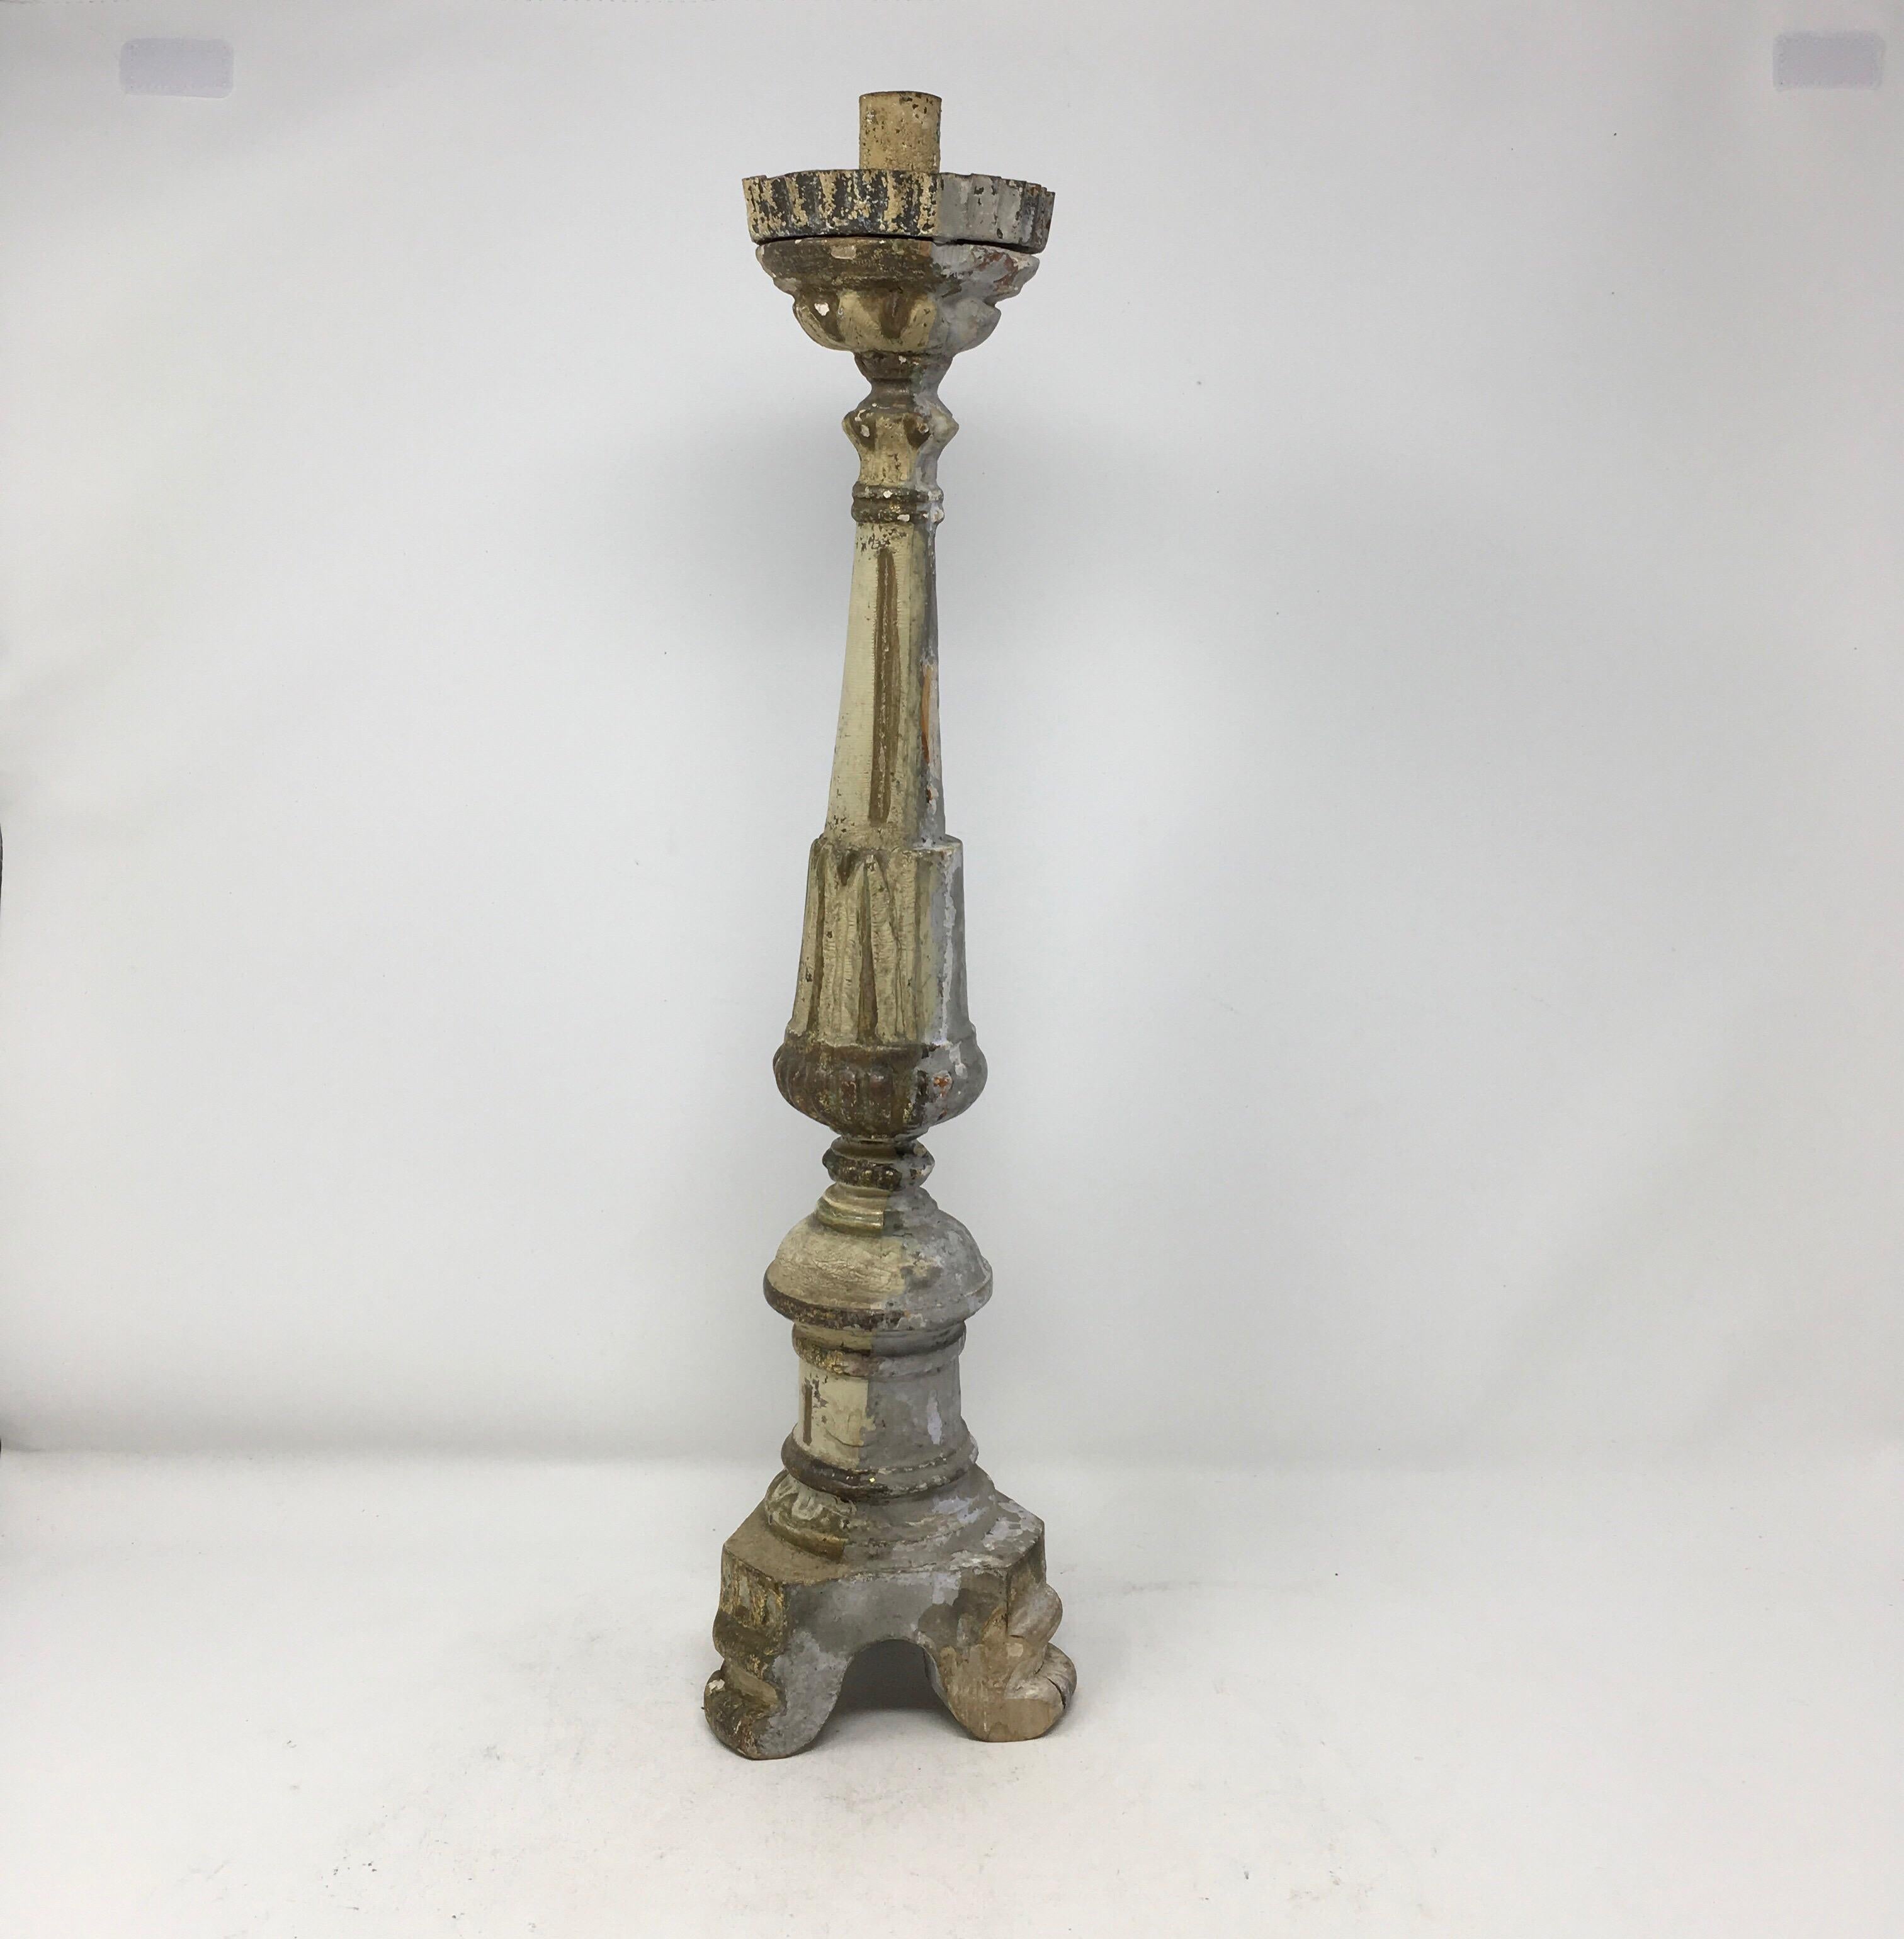 Italian late 18th-early 19th century altarstick. The central column is carved and raised on a tripod base. The top of this altarstick is metal and made to receive candles.